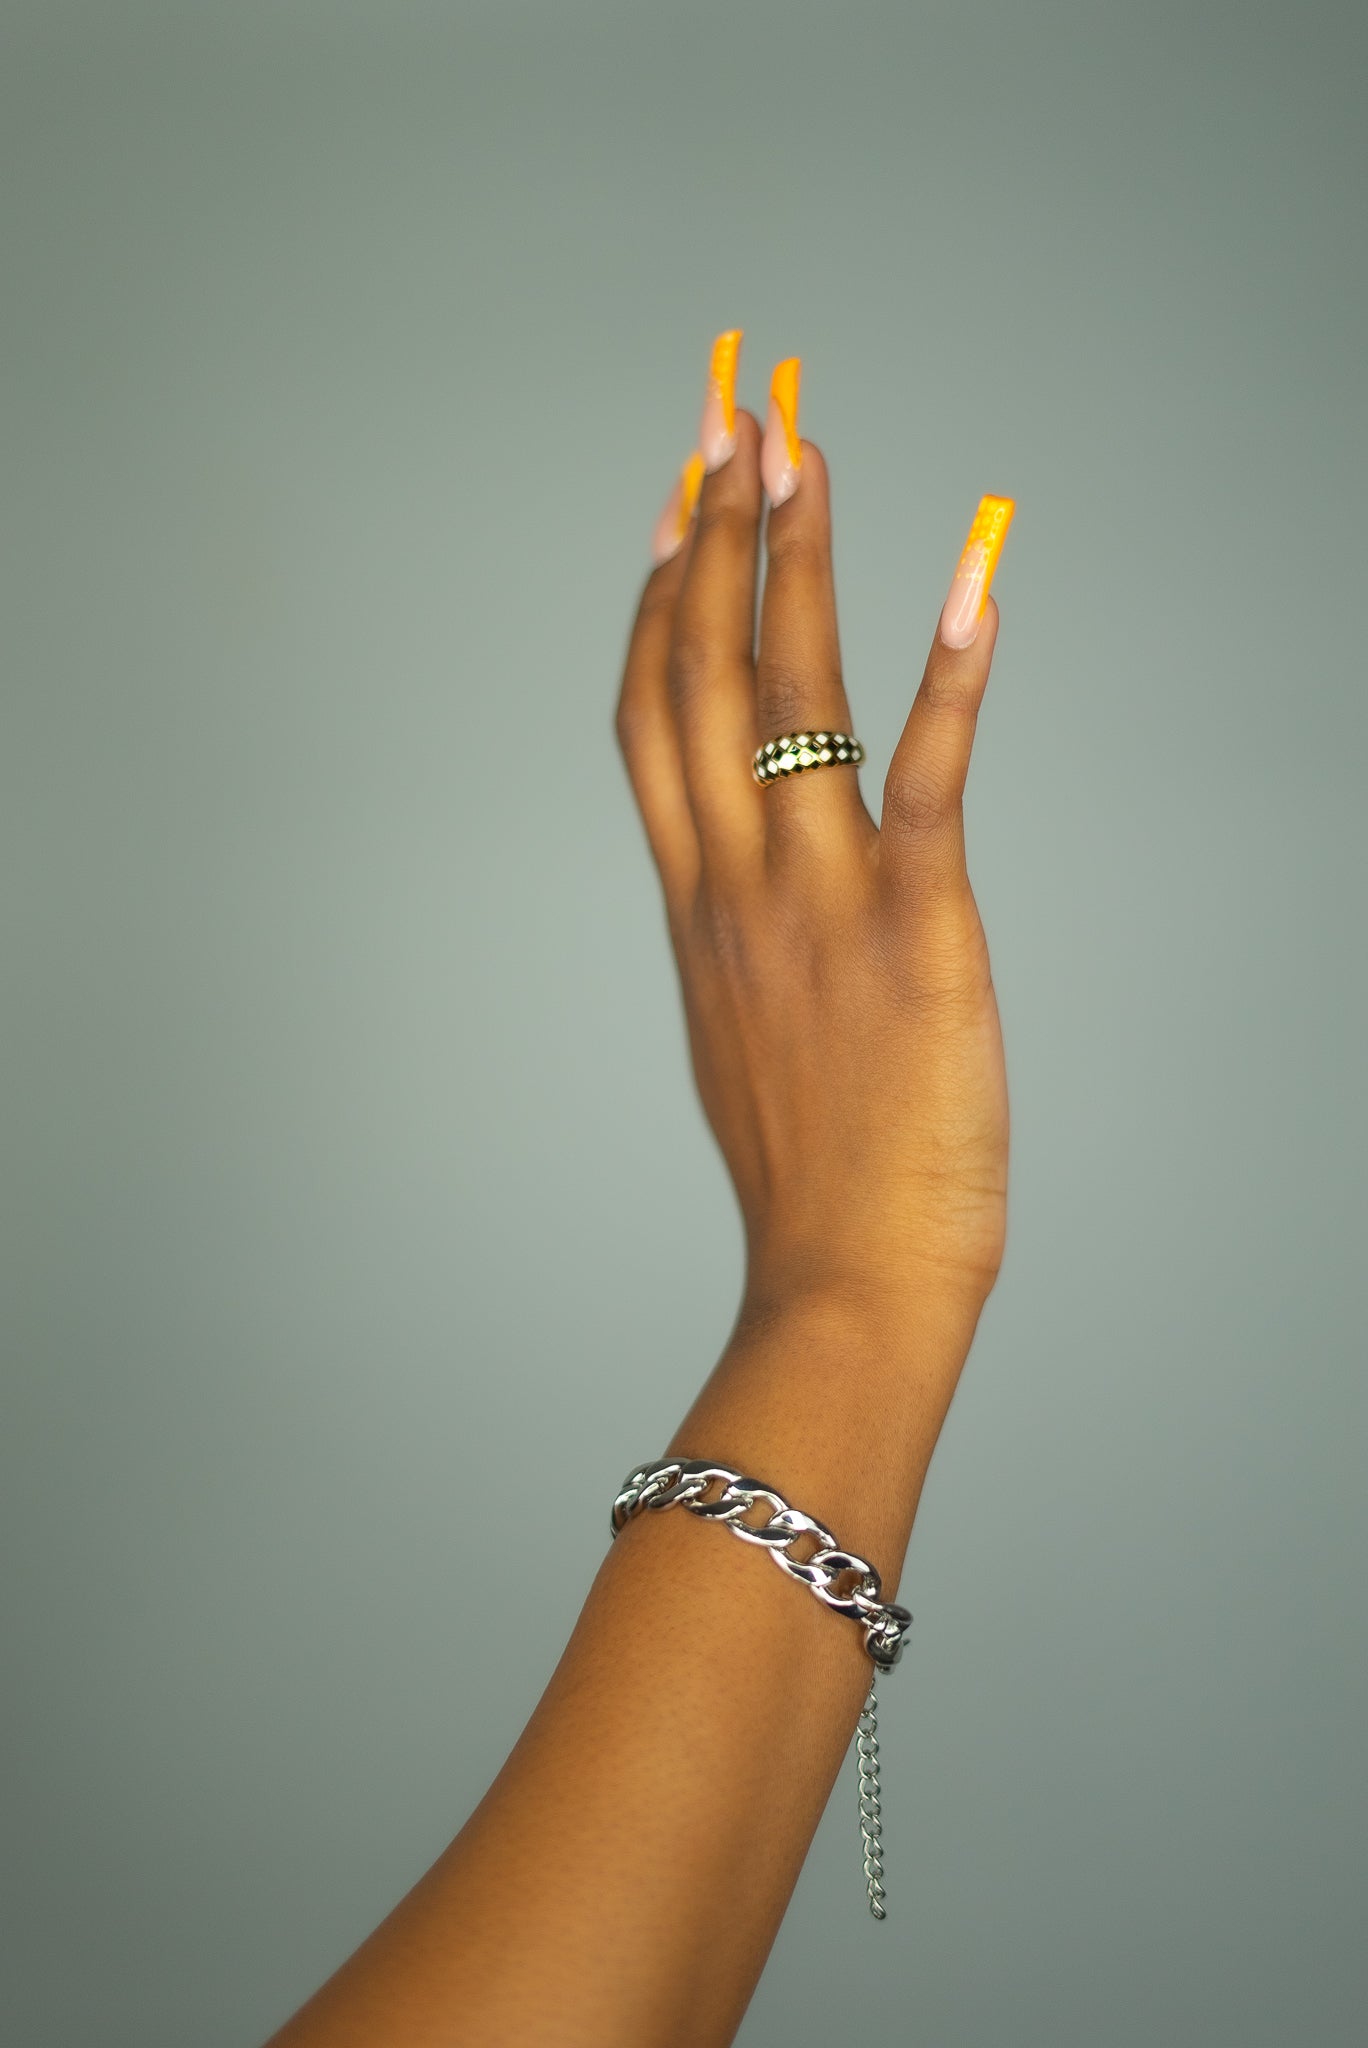 Model wearing an 18k gold ring with black and white diamond dots. The model is also wearing a silver chain bracelet. Minimalist Resin Ring by E's Element.